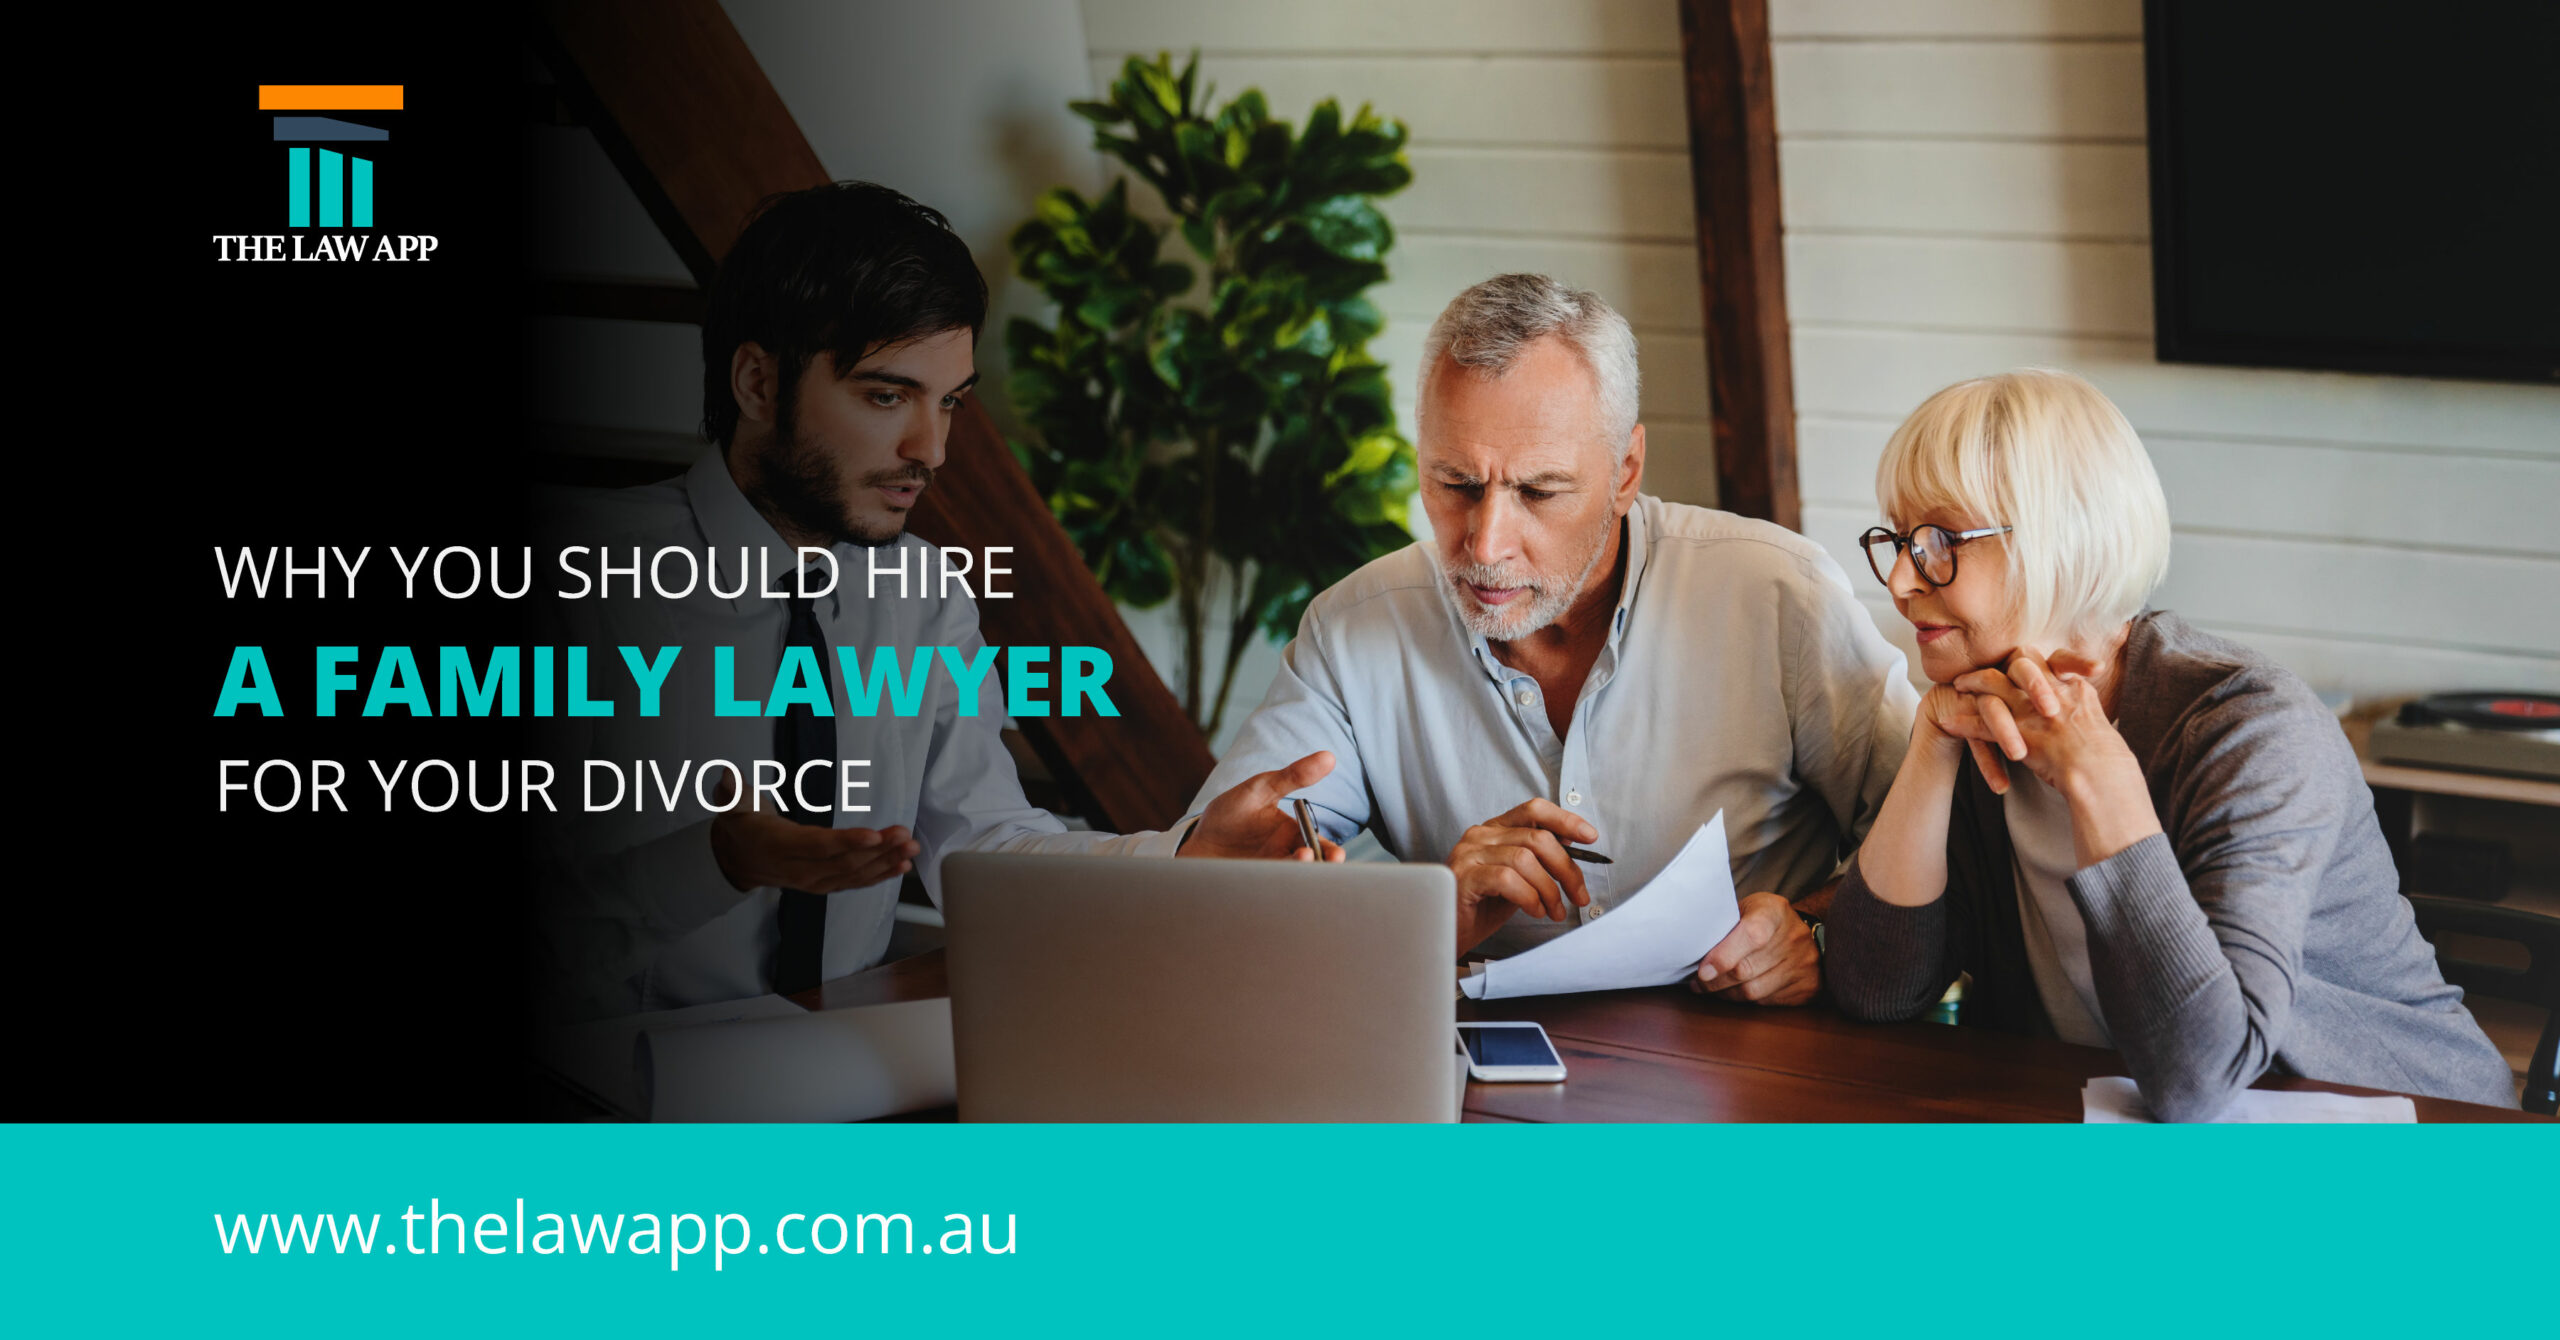 Why You Should Hire a Family Lawyer for Your Divorce